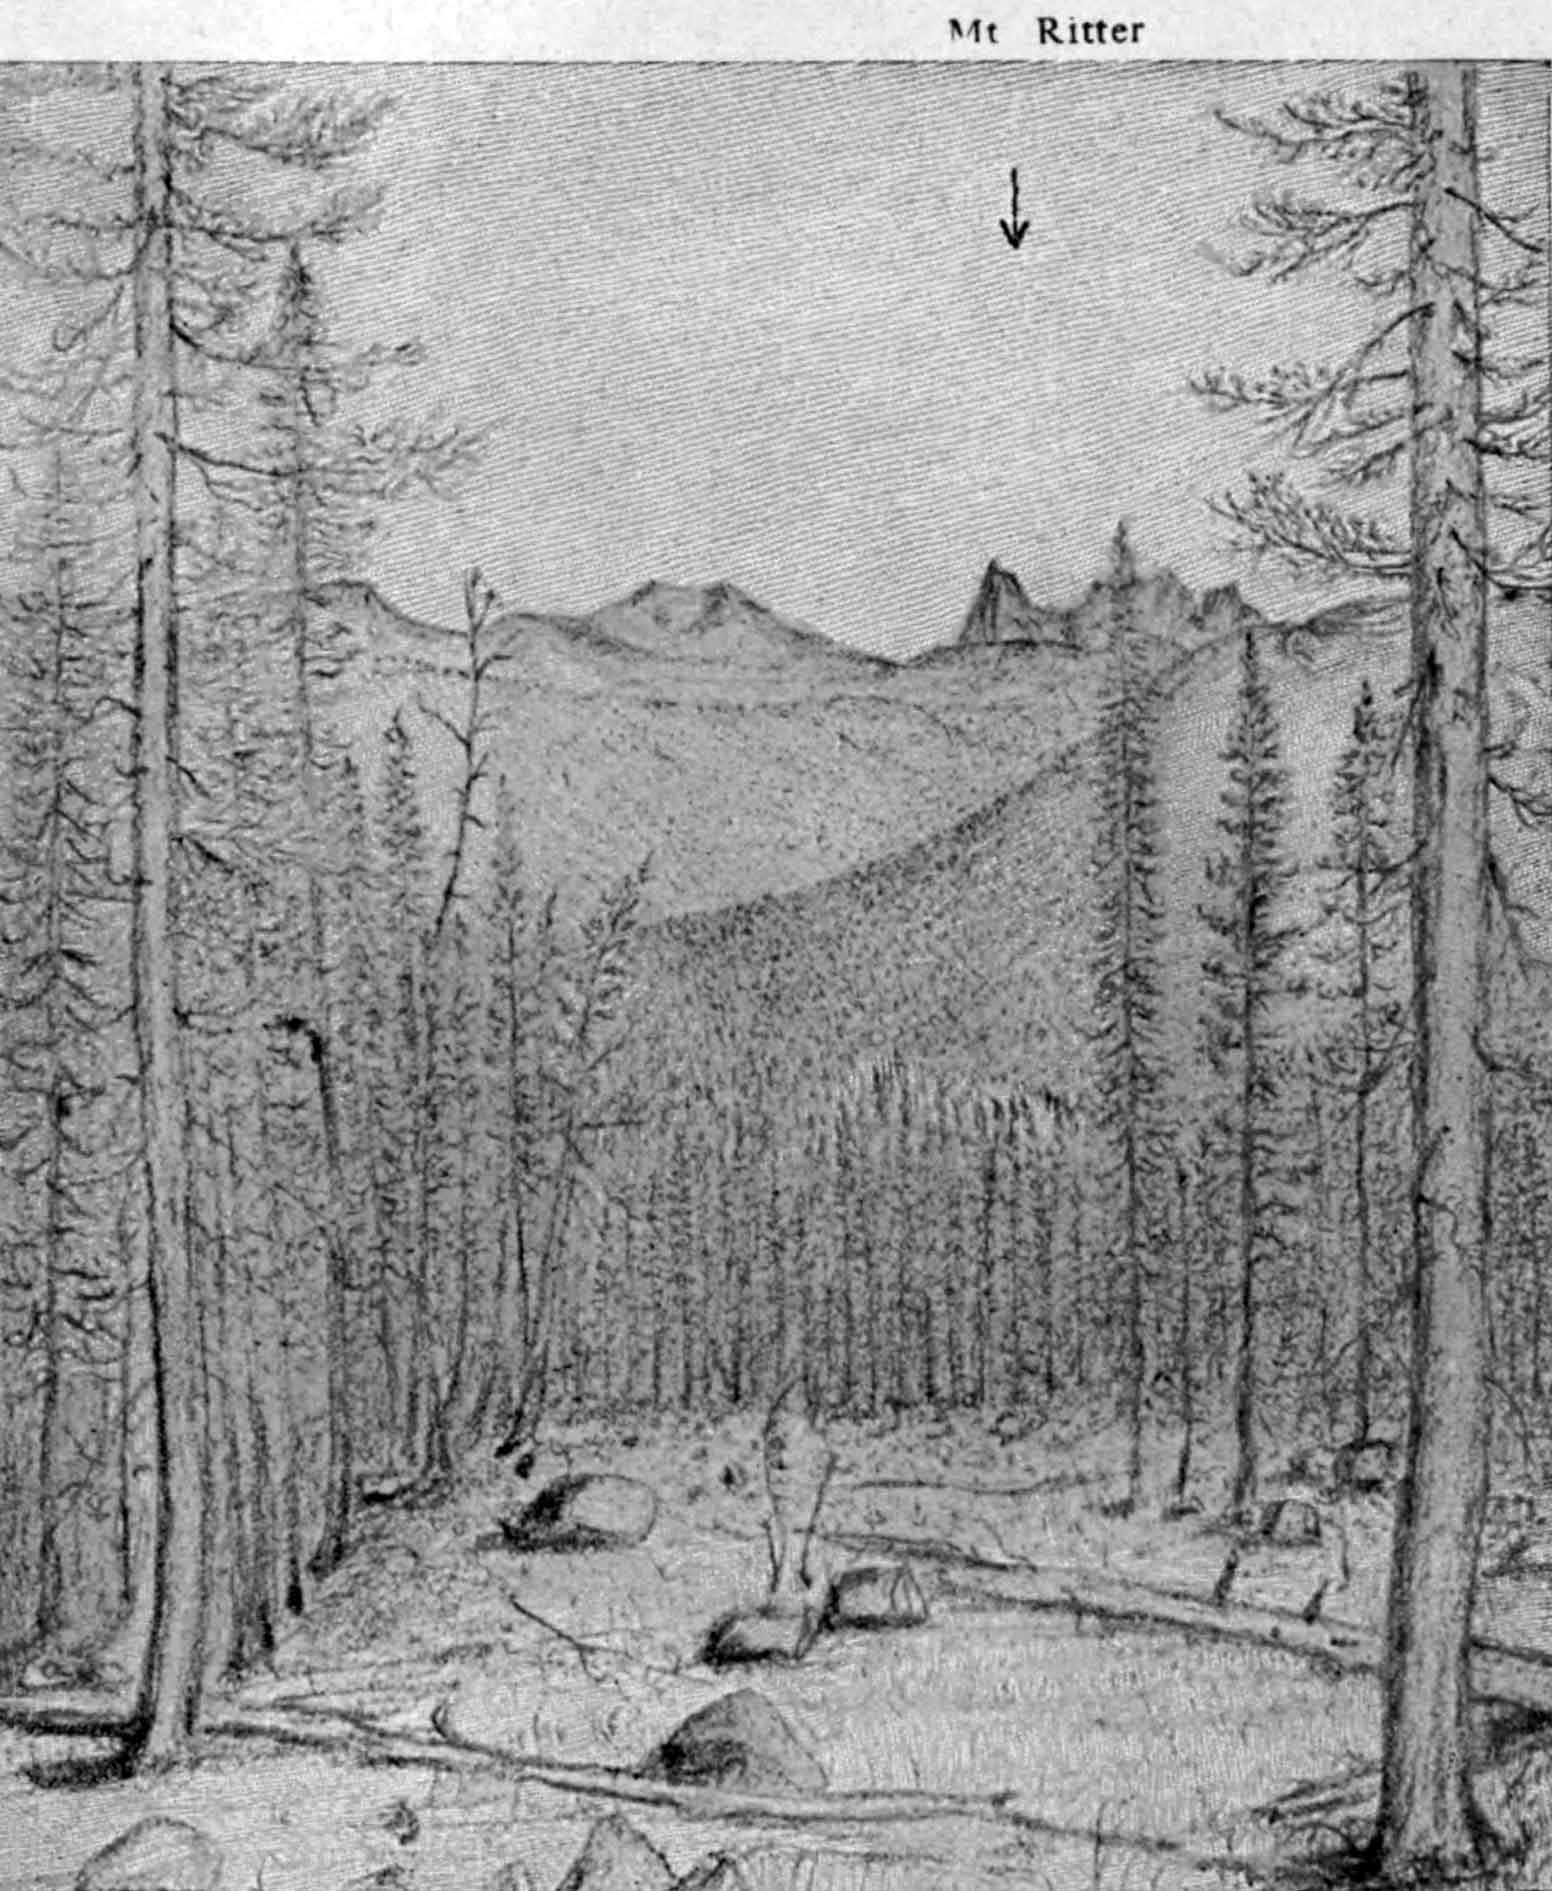 A sketch of a mountain landscape with a small clearing that is surrounded by thick forest. In the distance is a ridge of high ground and a cluster of jagged peaks.